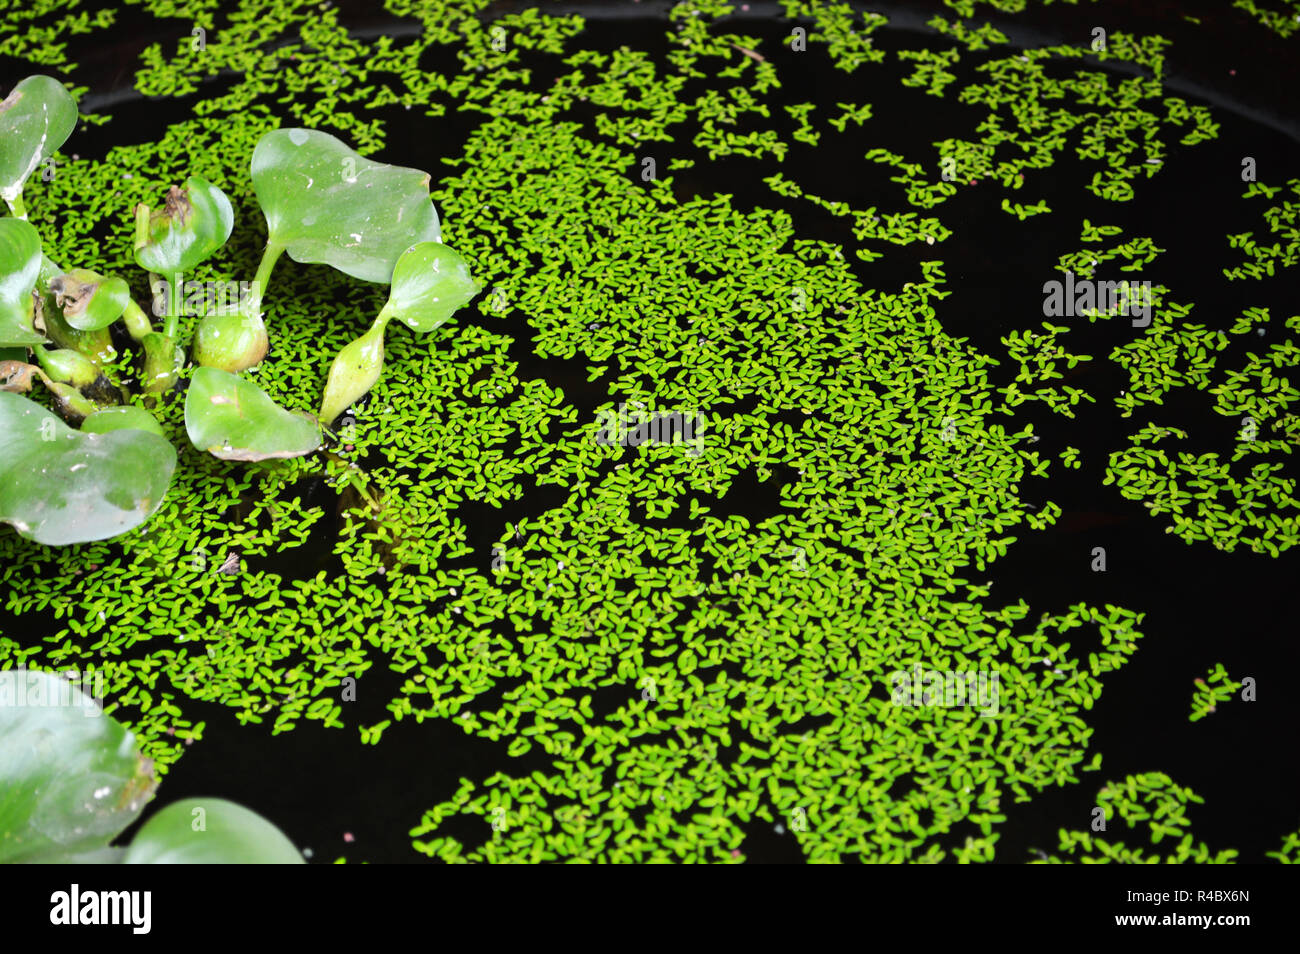 green duckweed covered on the surface / pond with water hyacinth plant and duckweed on nature river Stock Photo